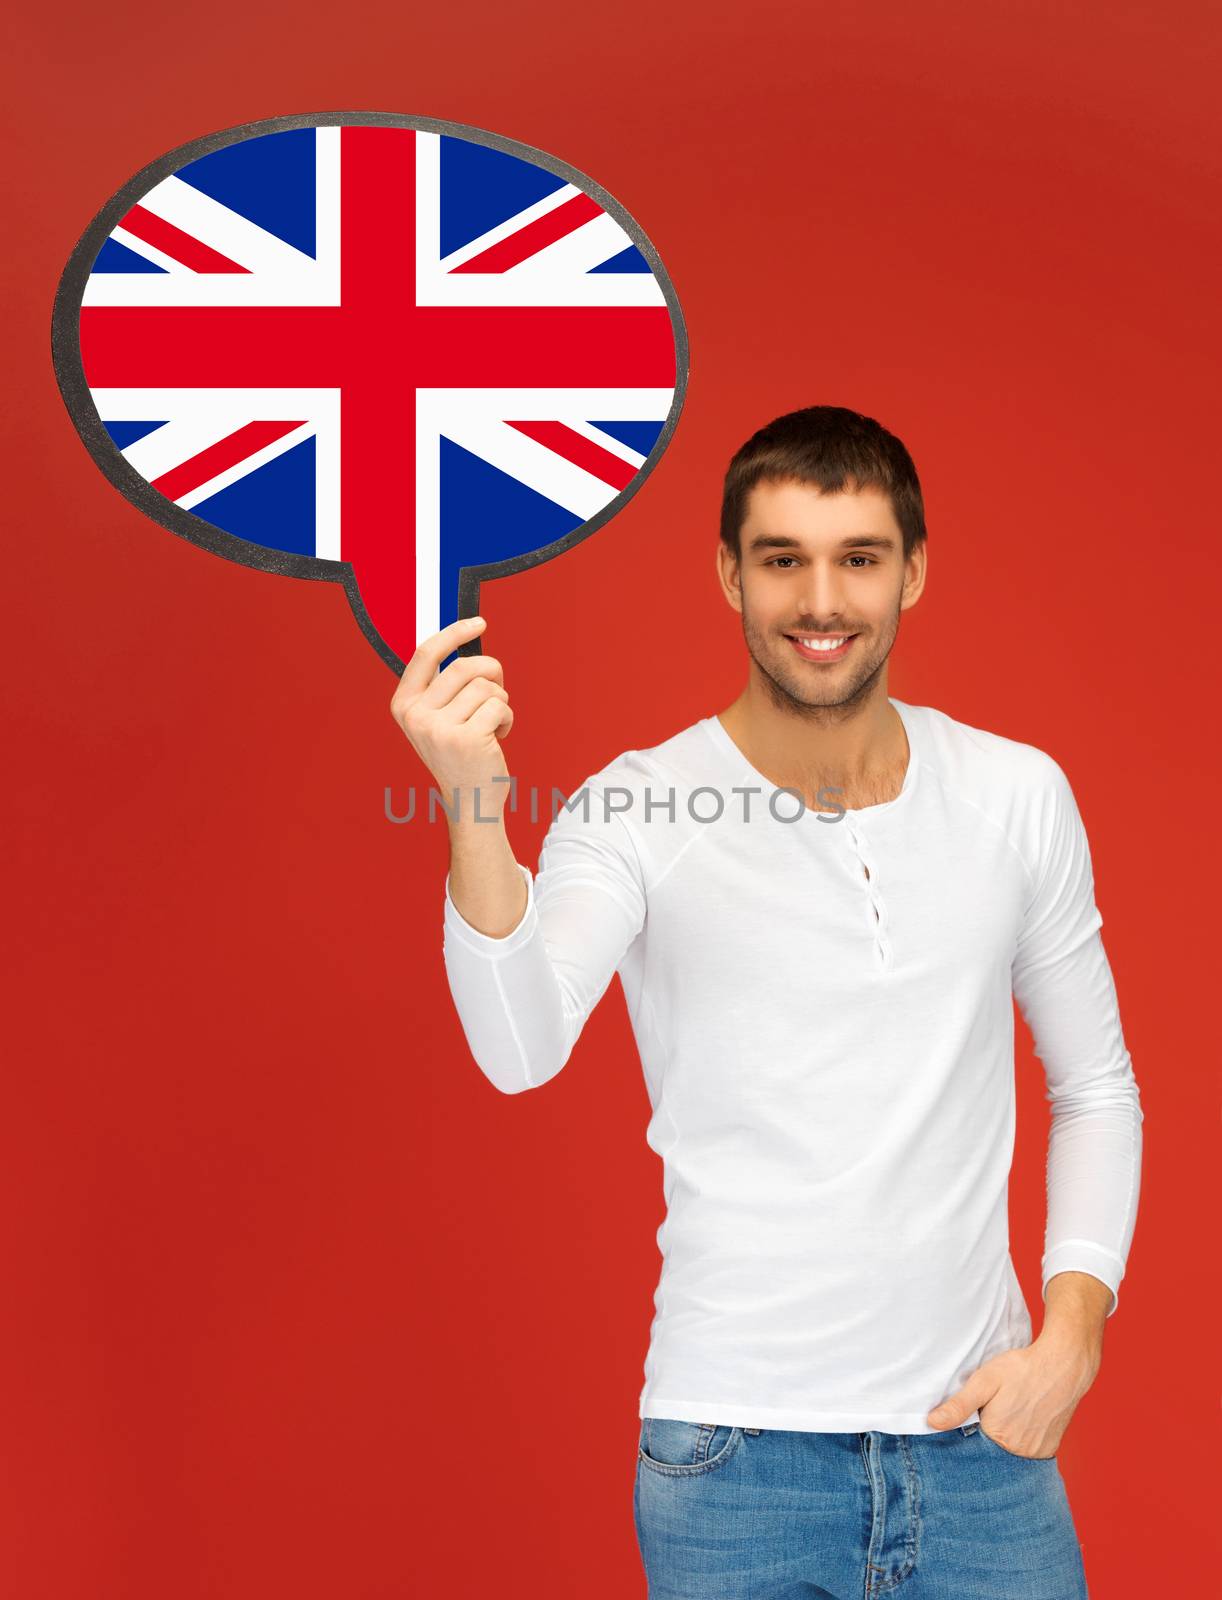 education, fogeign language, english, people and communication concept - smiling young man holding text bubble of british flag